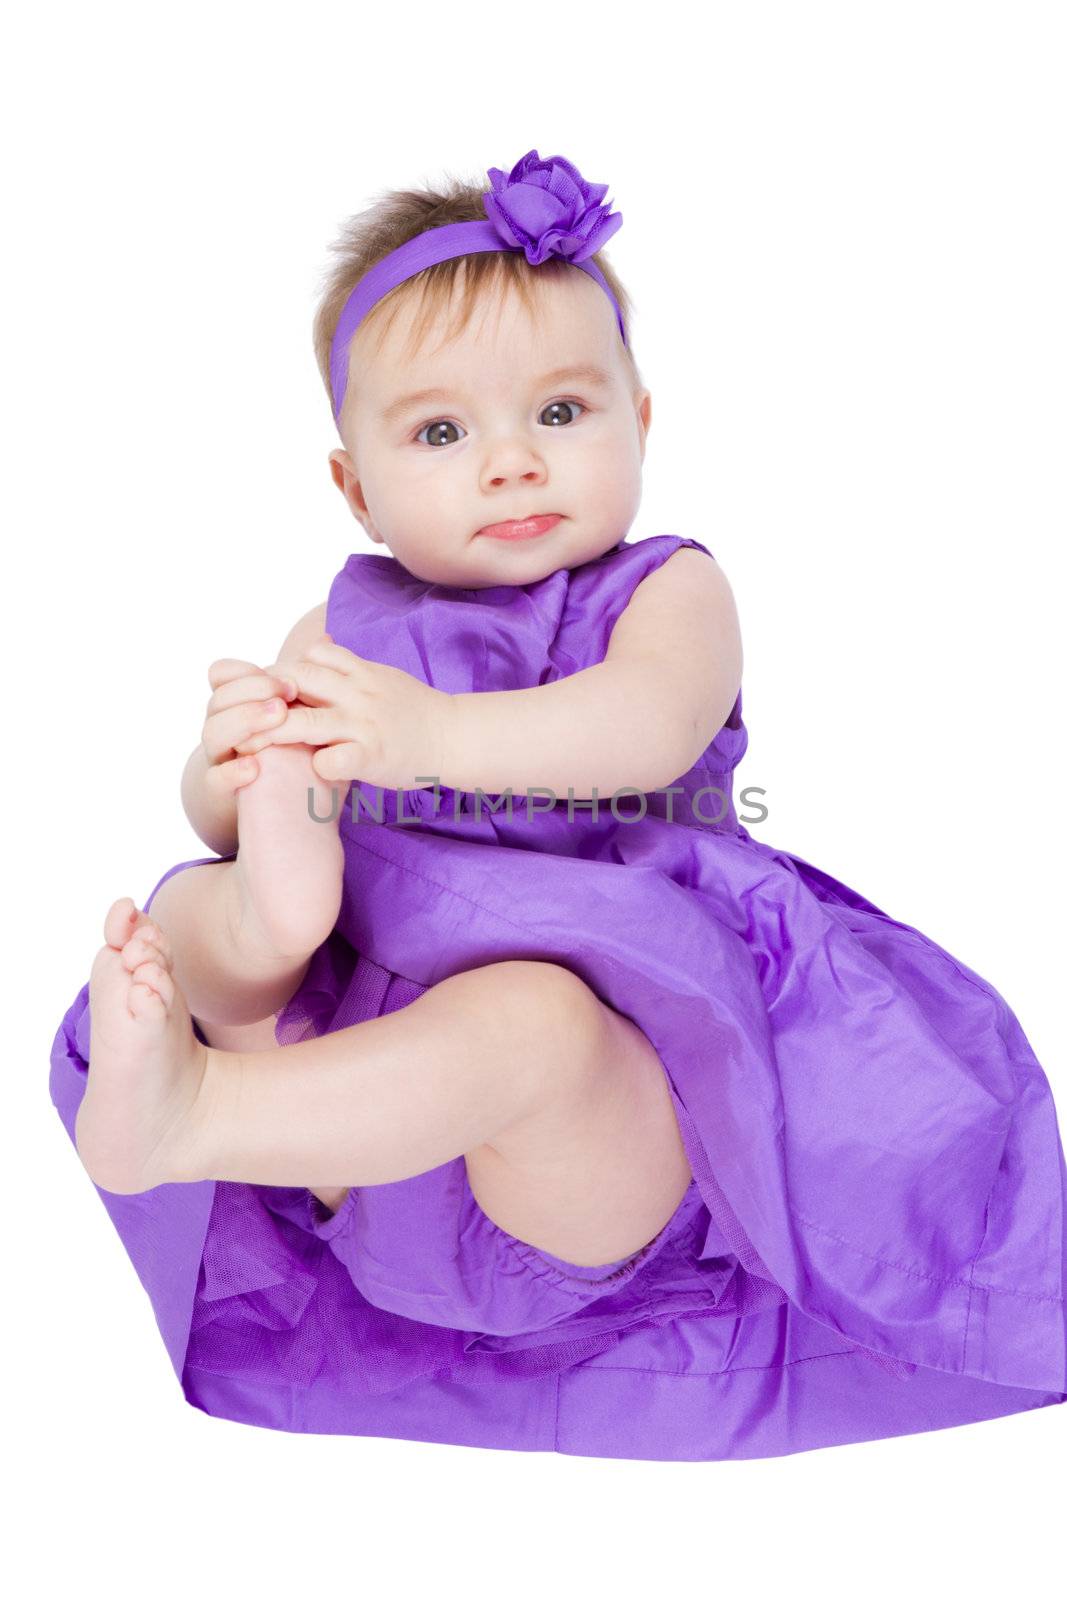 Pretty young baby girl in her purple dress and headband looking at camera.